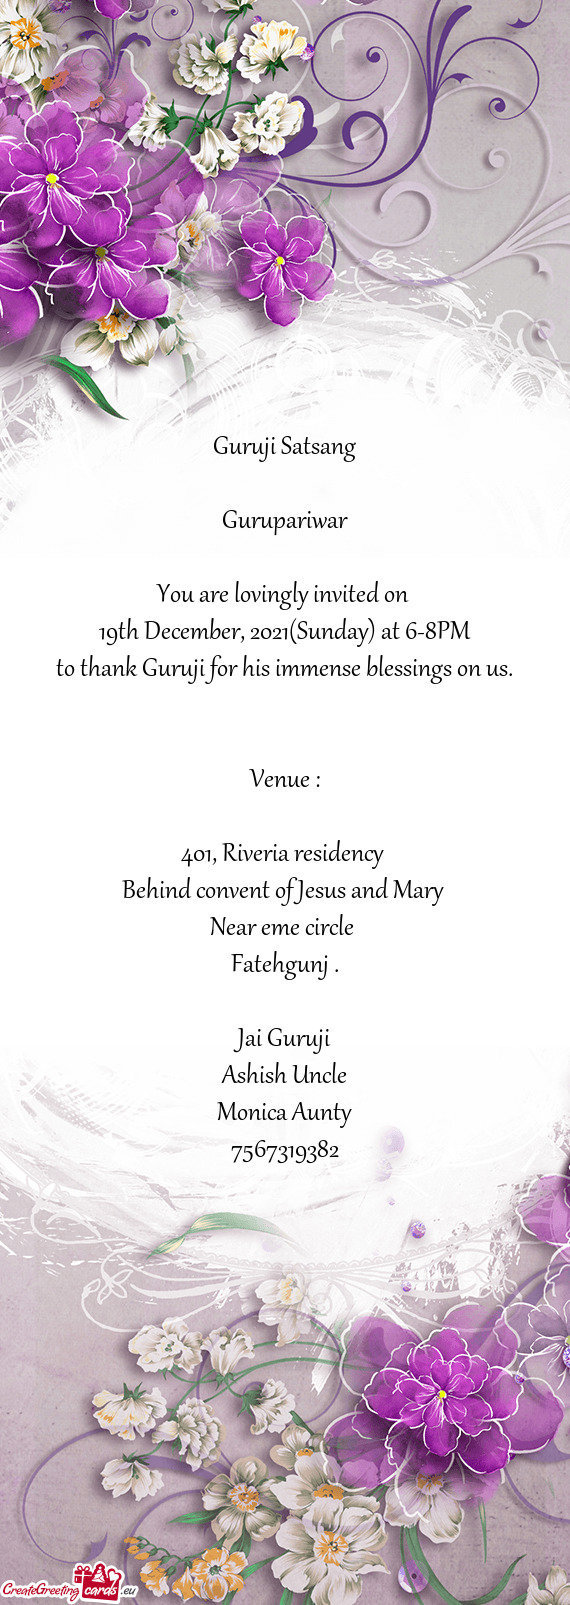 19th December, 2021(Sunday) at 6-8PM